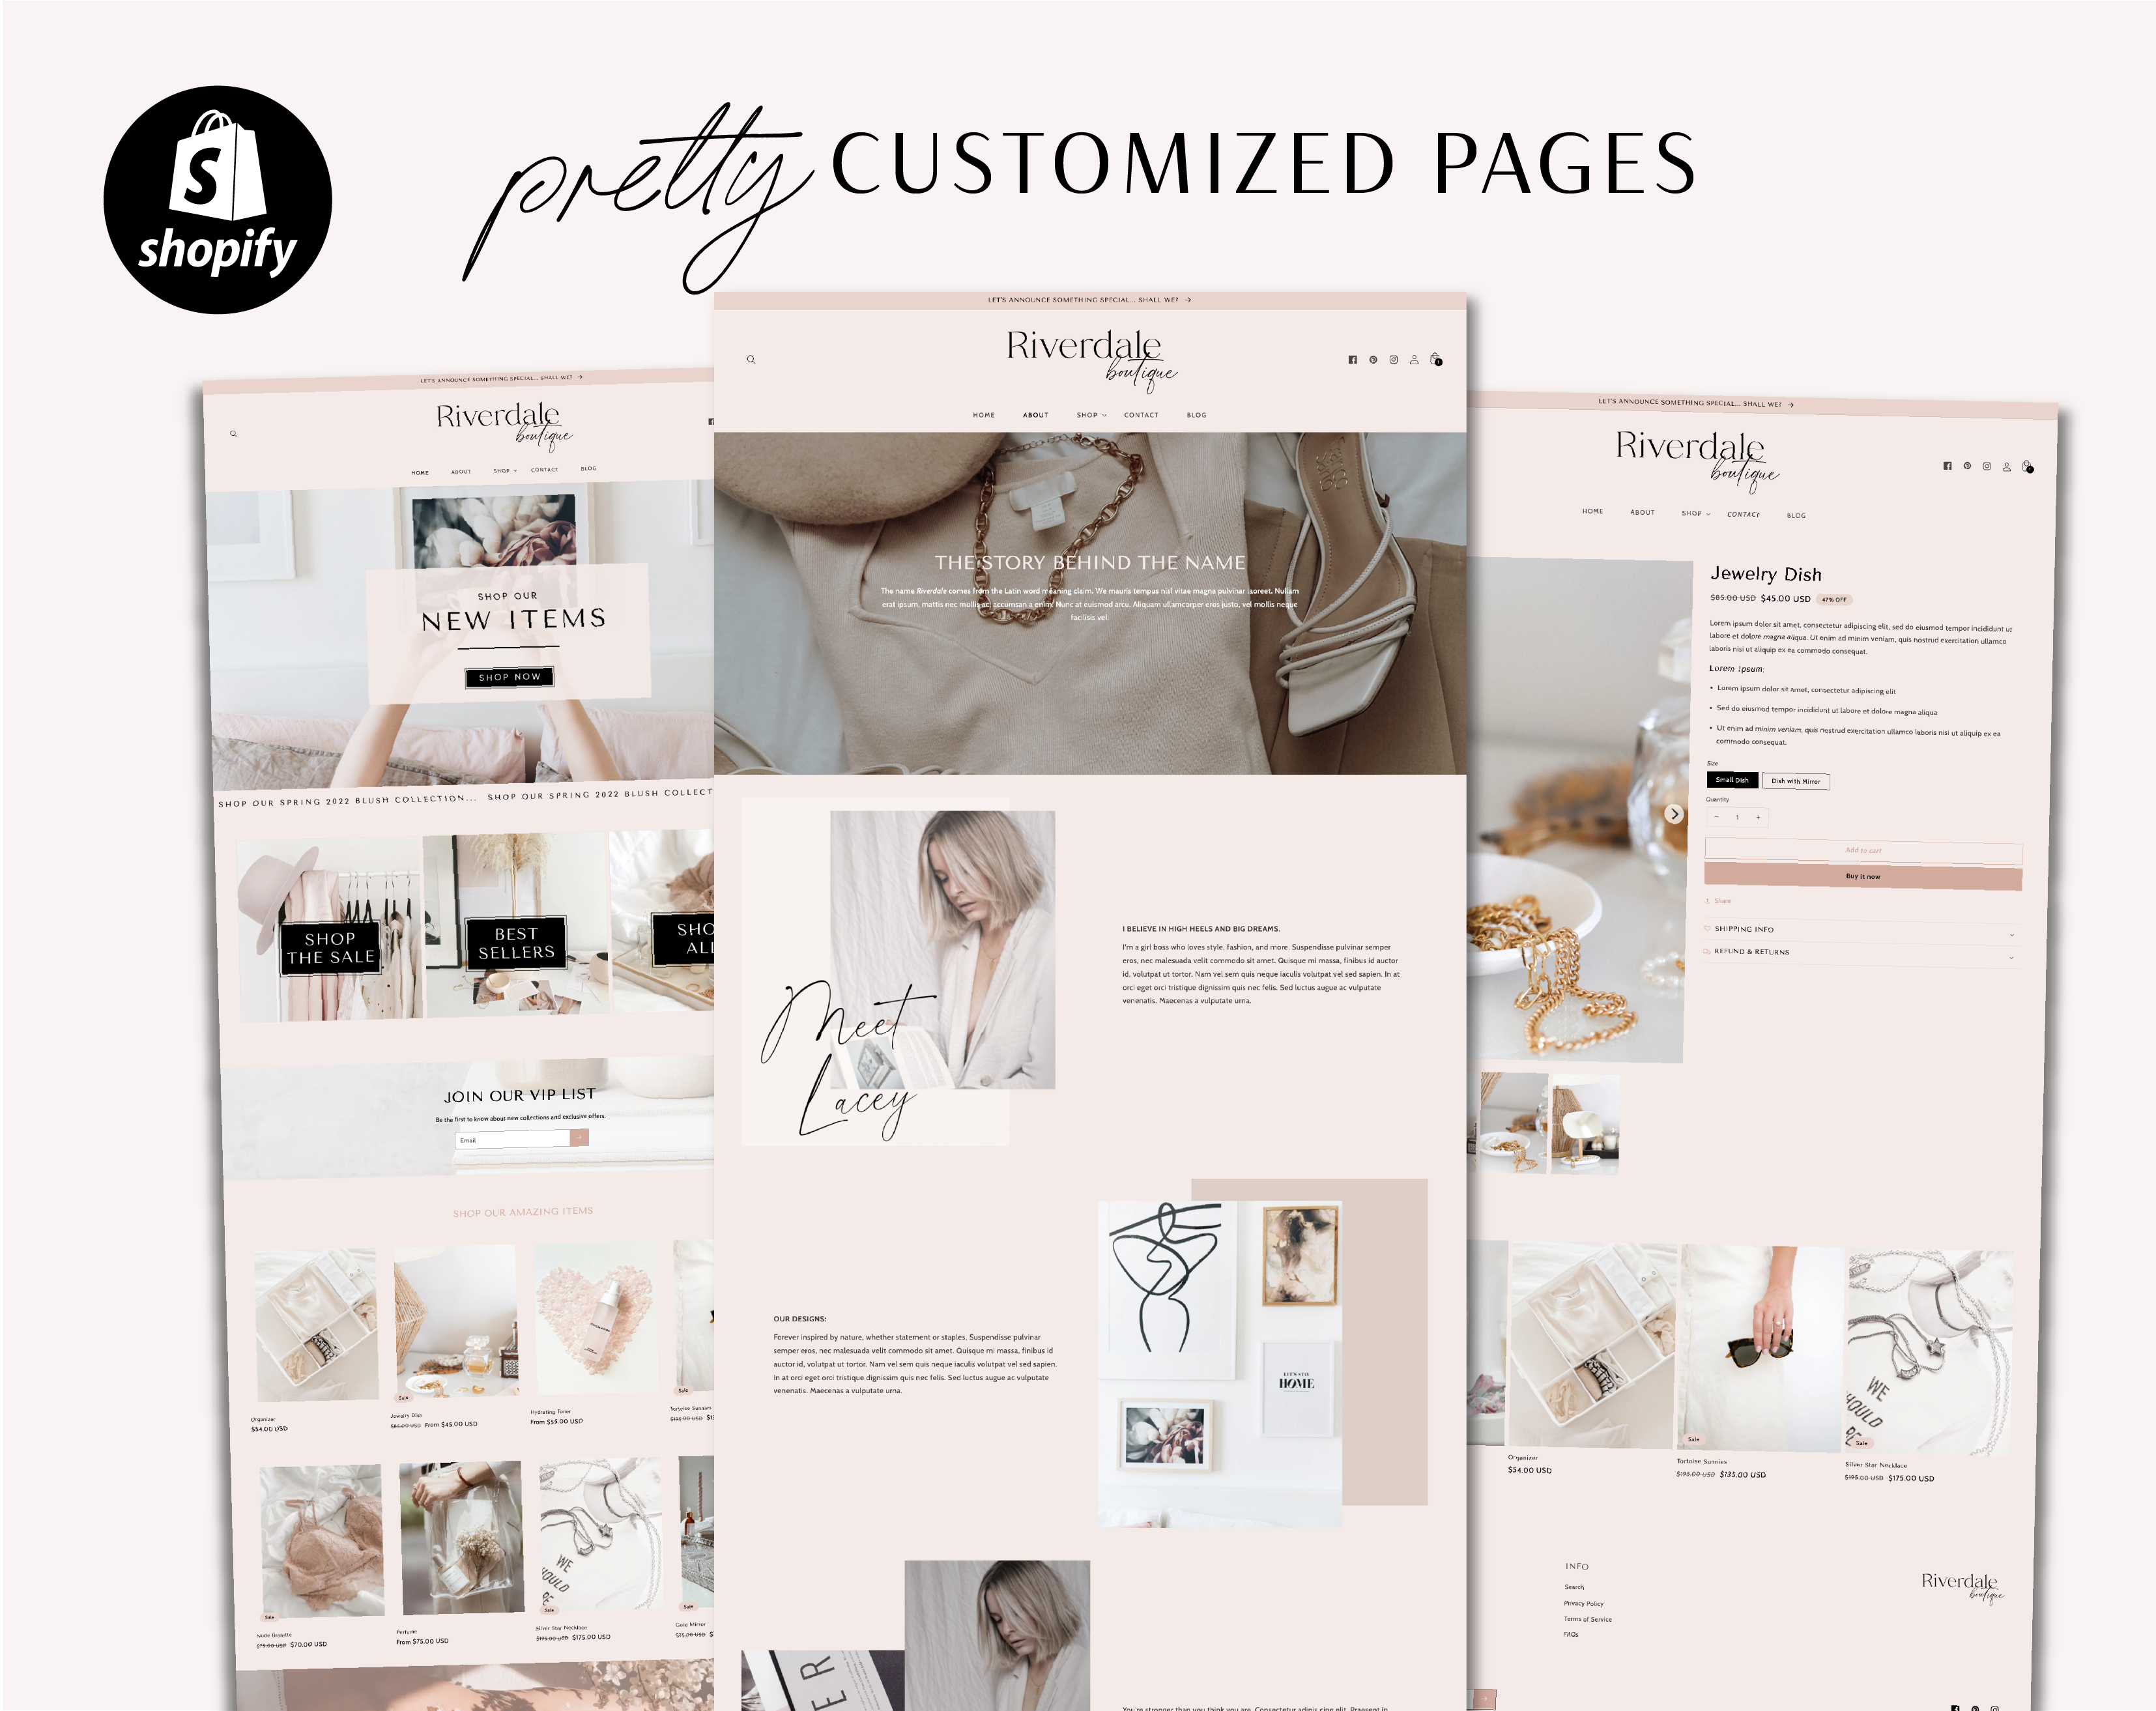 Best Shopify Theme 2022, Luxe Shopify Theme Template, Minimal Shopify 2.0 theme in a luxurious black and white design. A creative Shopify website with banners